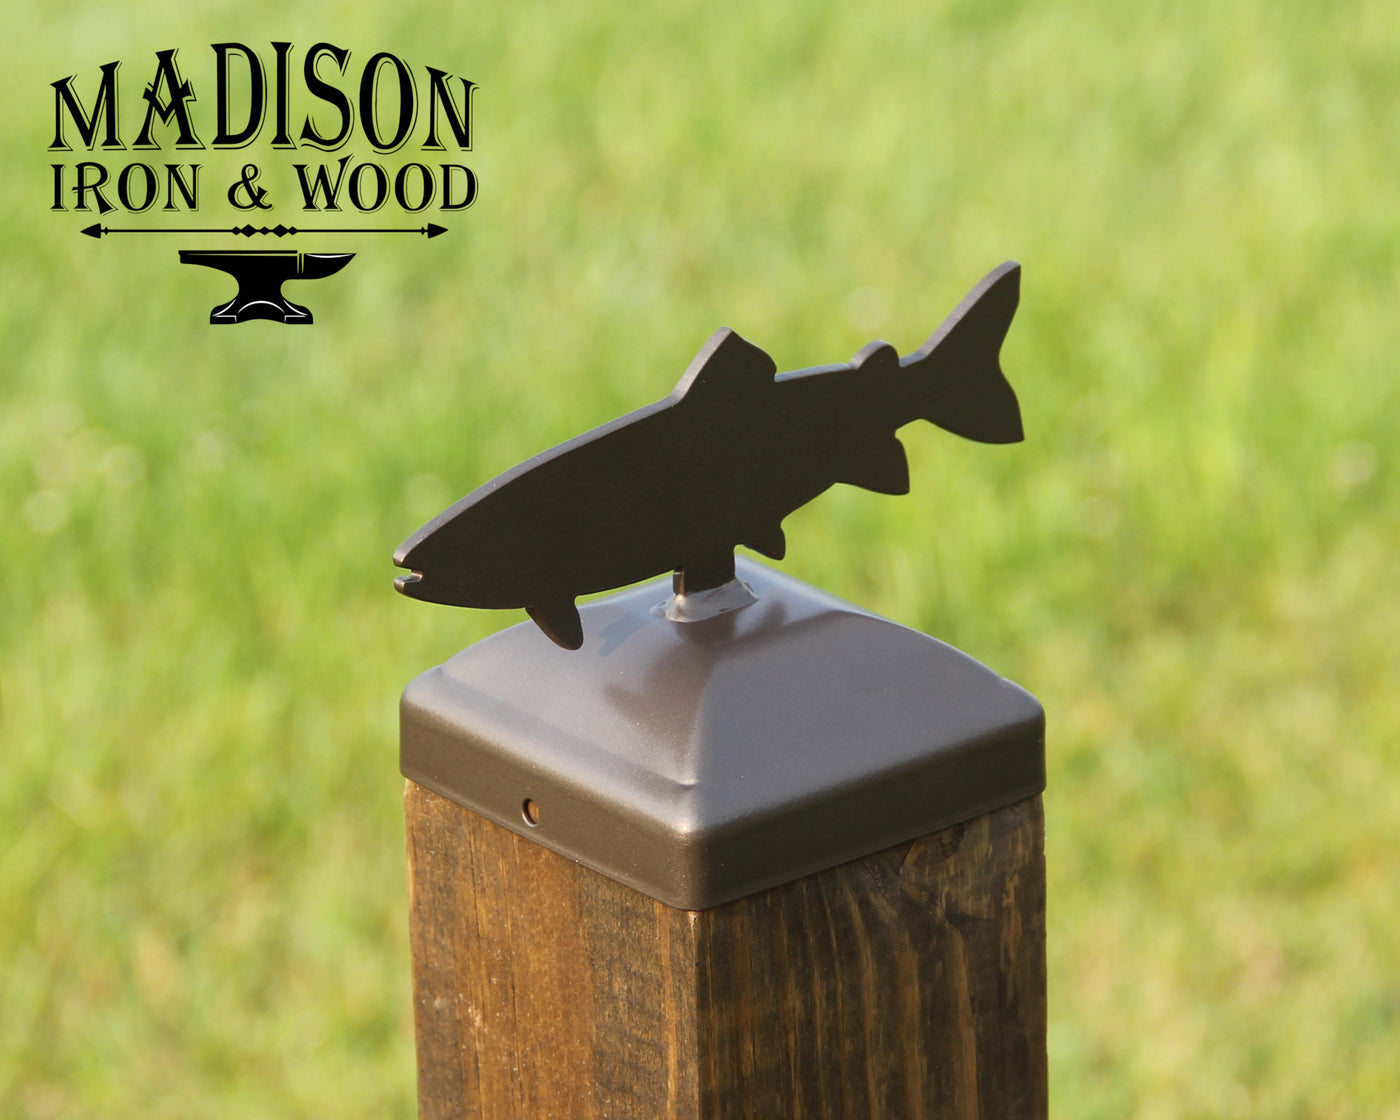 4x4 Trout Post Cap - Madison Iron and Wood - Post Cap - metal outdoor decor - Steel deocrations - american made products - veteran owned business products - fencing decorations - fencing supplies - custom wall decorations - personalized wall signs - steel - decorative post caps - steel post caps - metal post caps - brackets - structural brackets - home improvement - easter - easter decorations - easter gift - easter yard decor